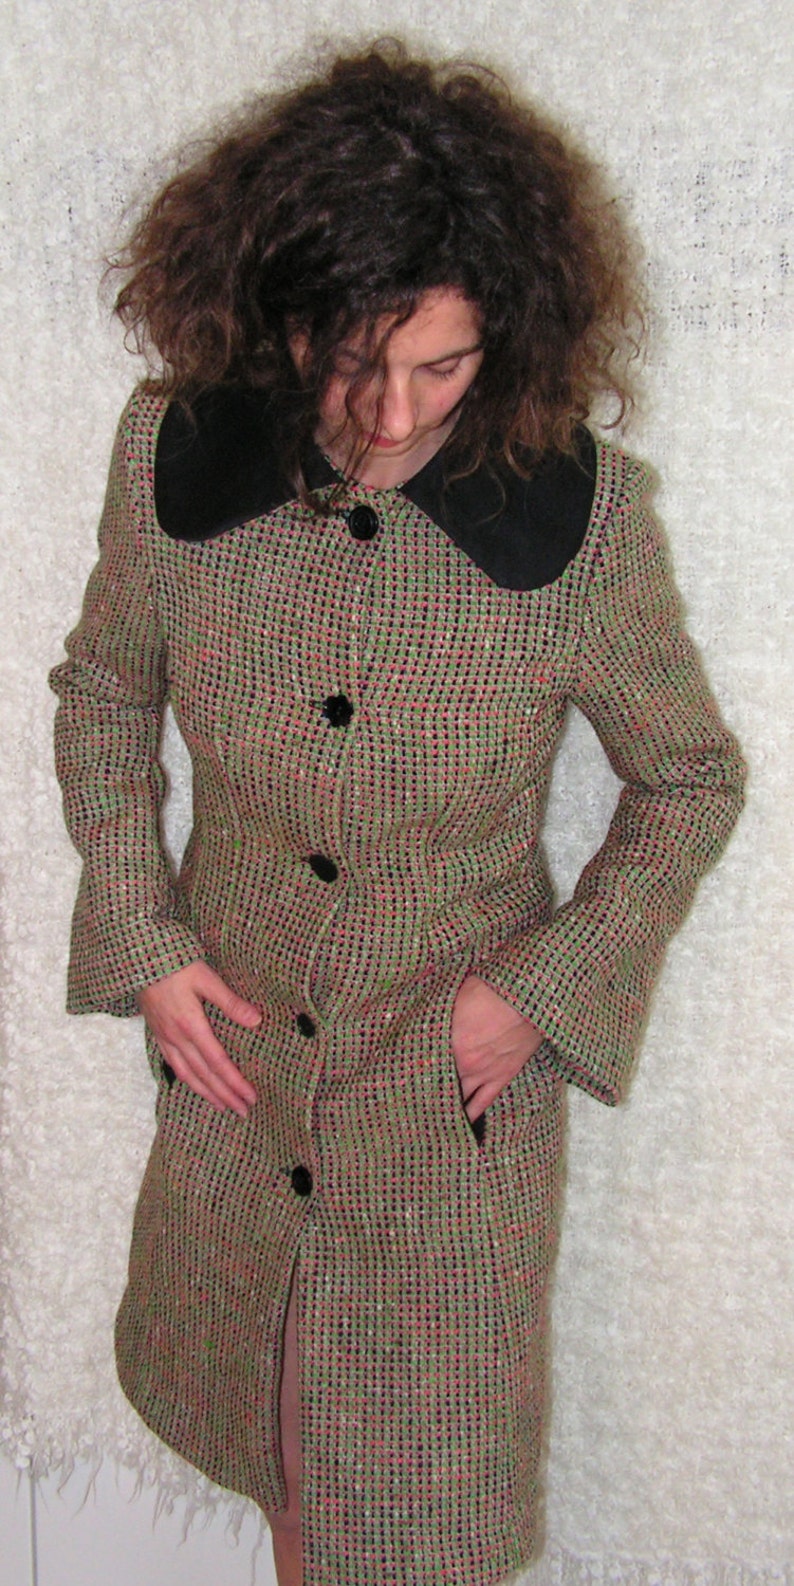 Multicolored and black wool coat curved and